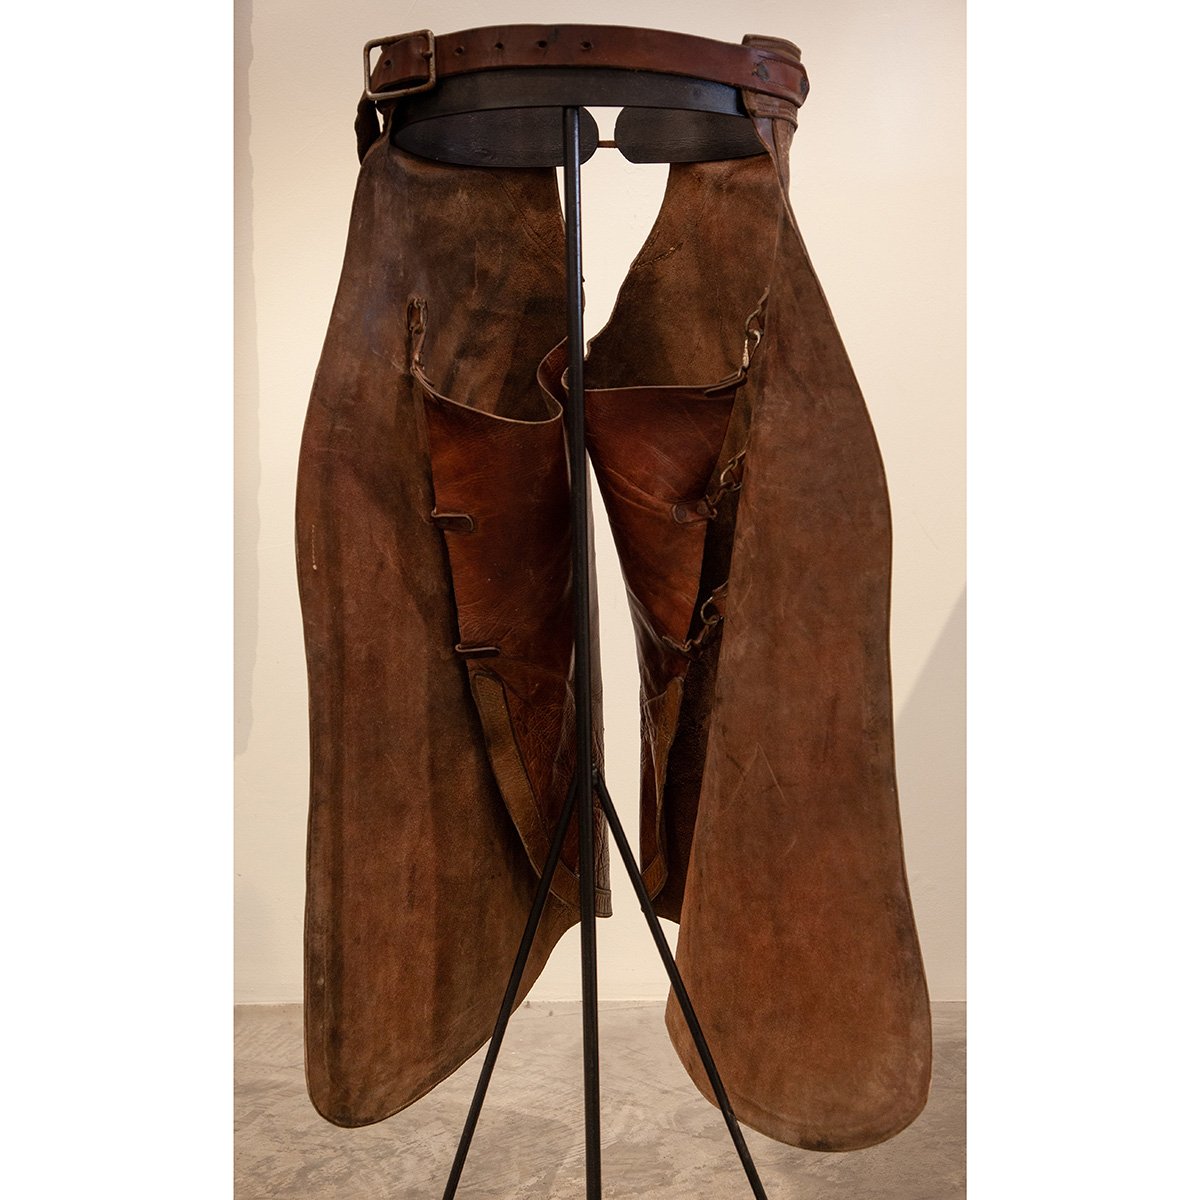 West Texas Chaps with Custom Stand - SOLD — Art Blackburn